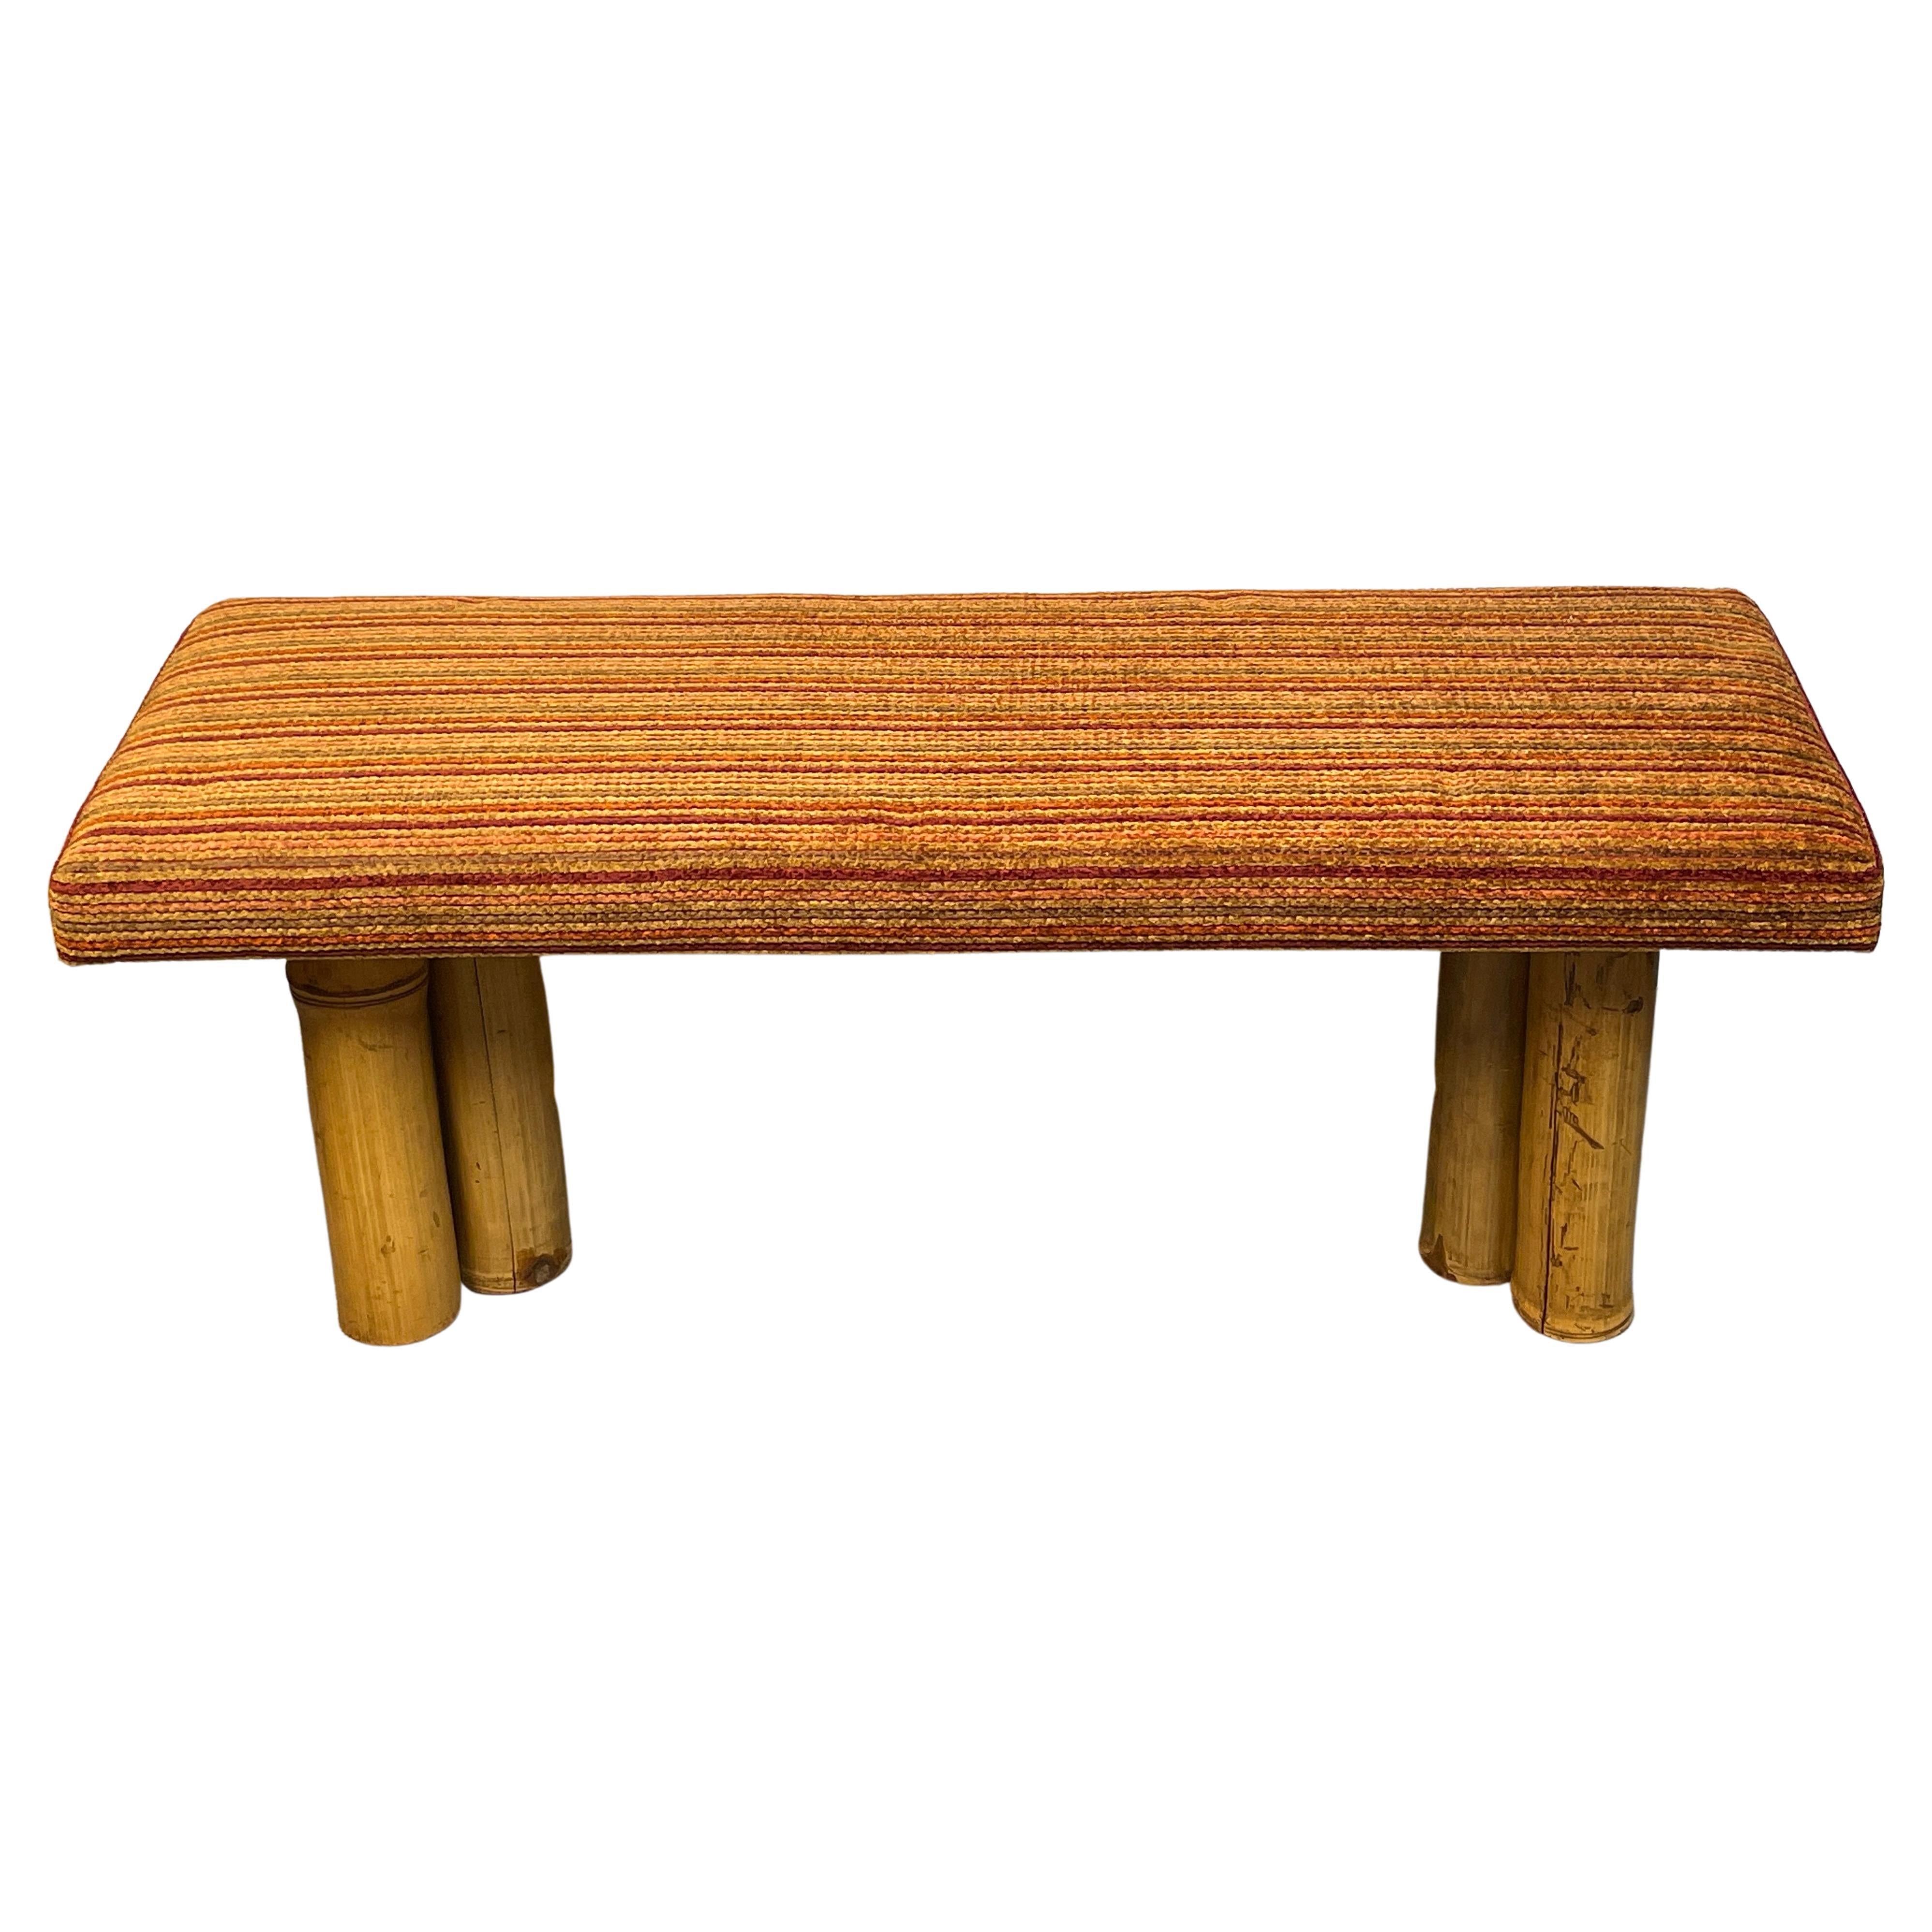 Bamboo Upholstered Long Bench, Circa 1950s For Sale